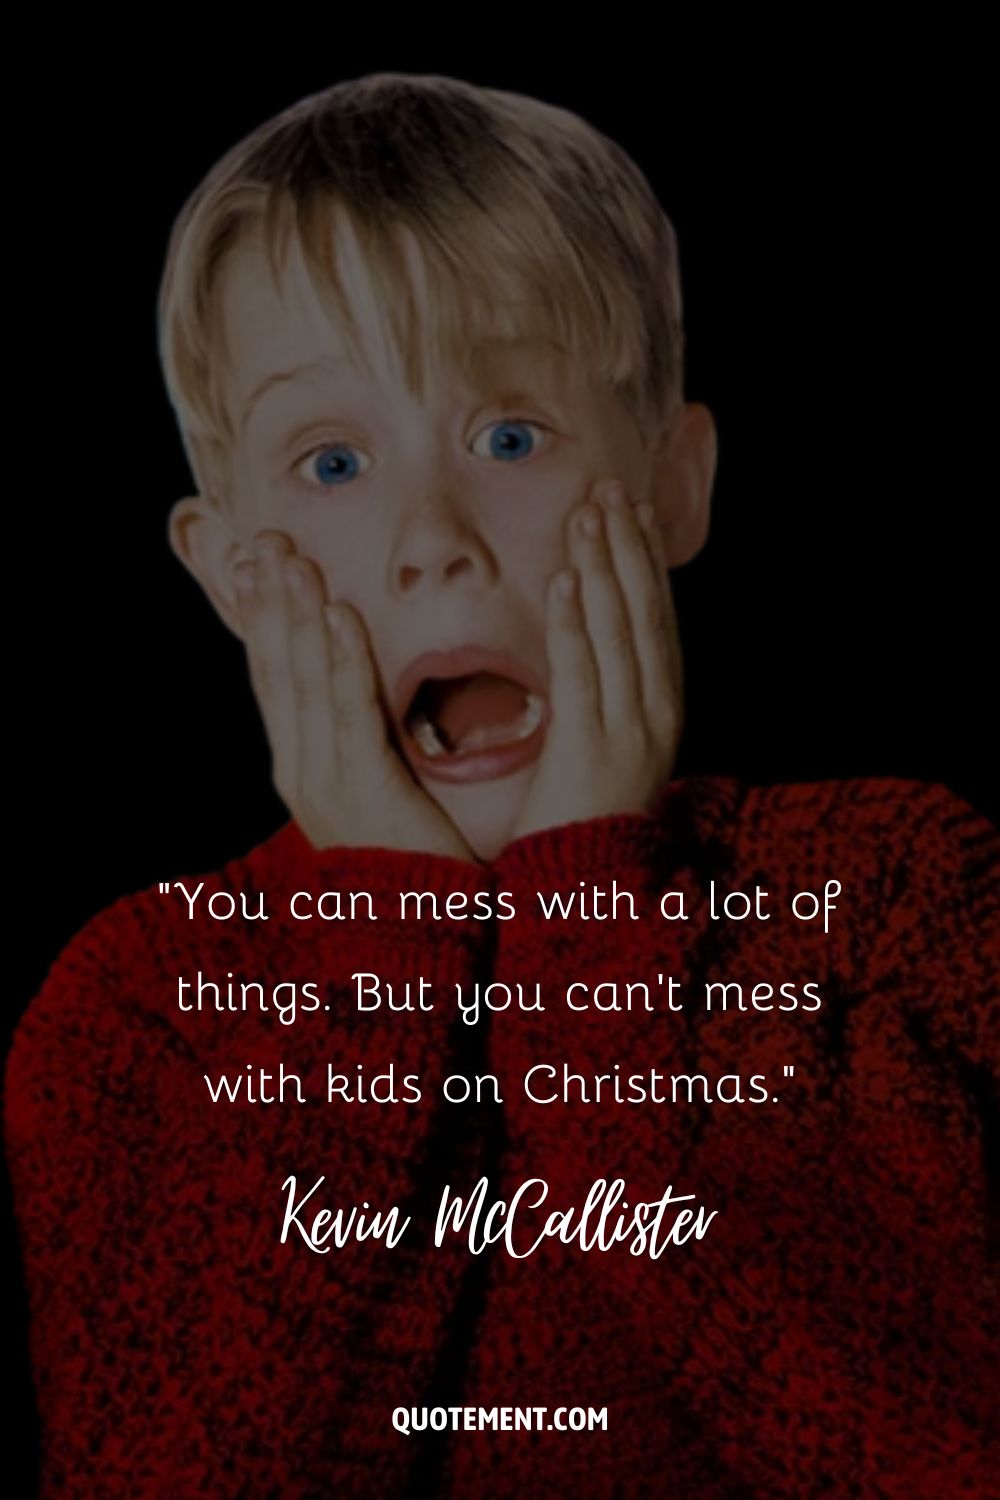 Kevin McCallister in a scared expression representing the best home alone quote
